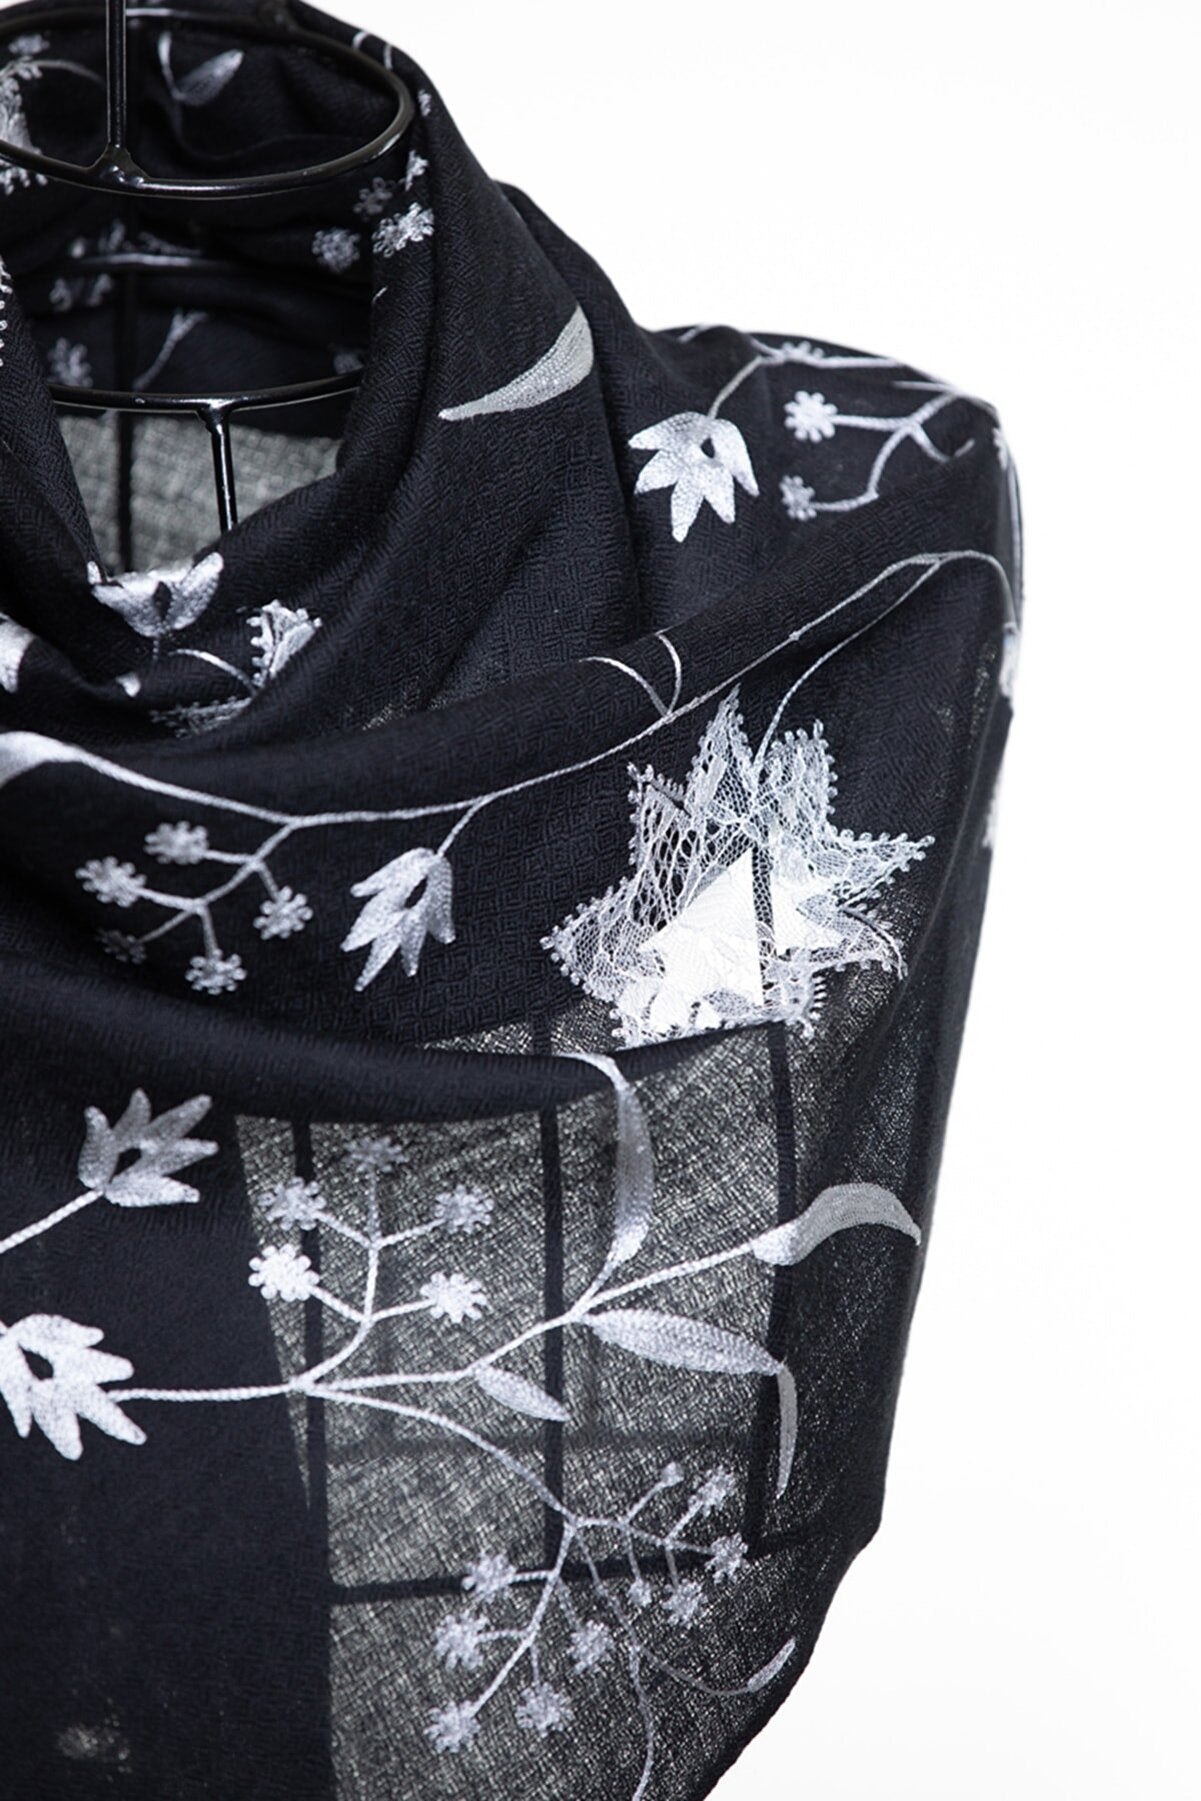 Border Lace & Embroidery Floral Sheer Shawl - Black & White